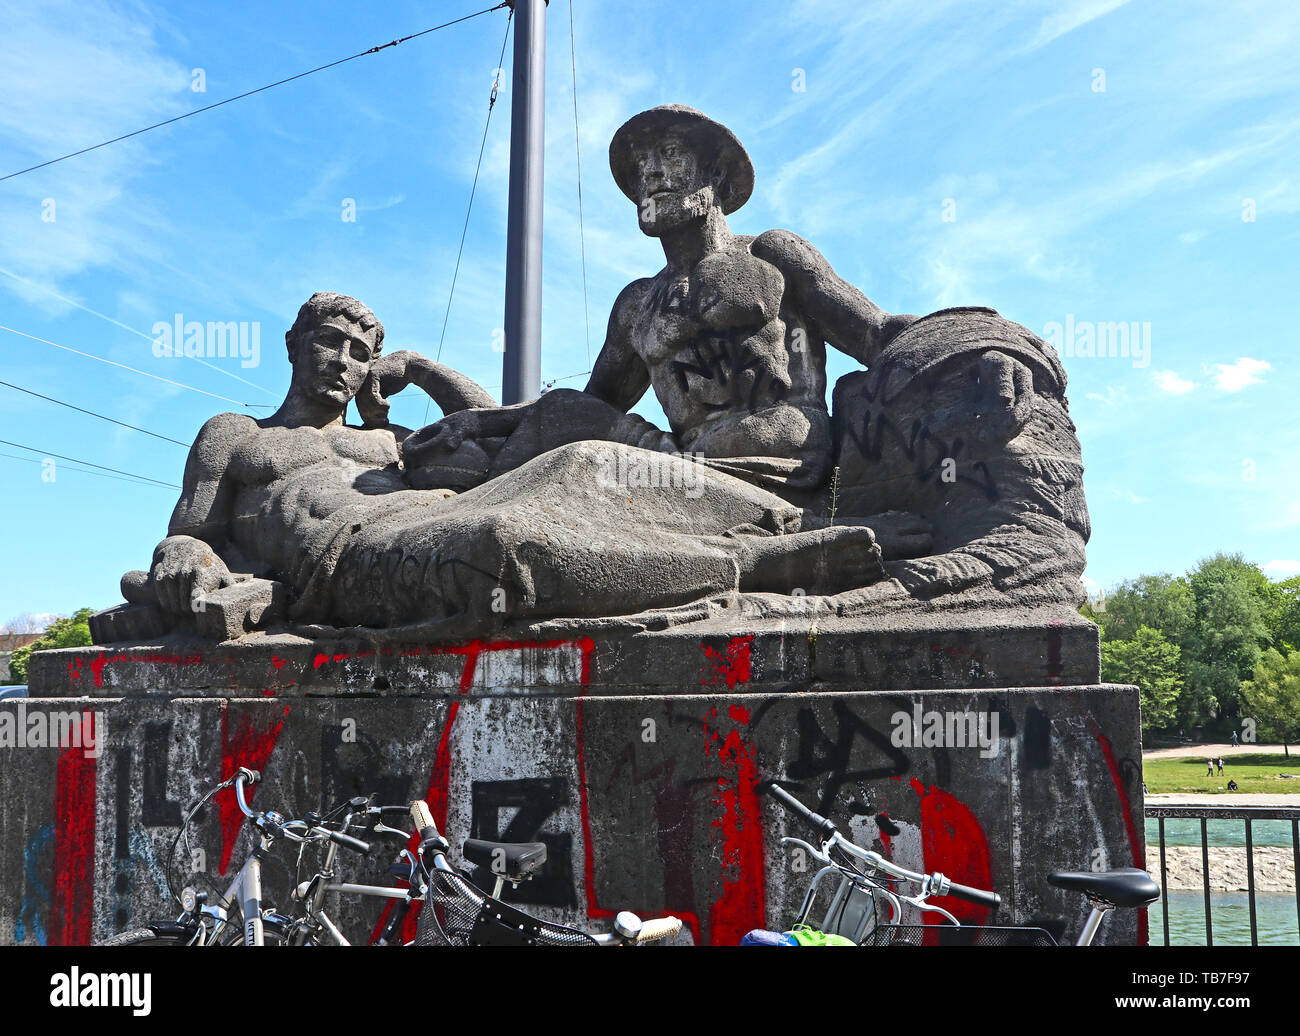 MUNICH, GERMANY - MAY 2, 2019 Sculpture group dated 1925 at the SW beginning of the Reichenback bridge over the Isar river in Munich Stock Photo